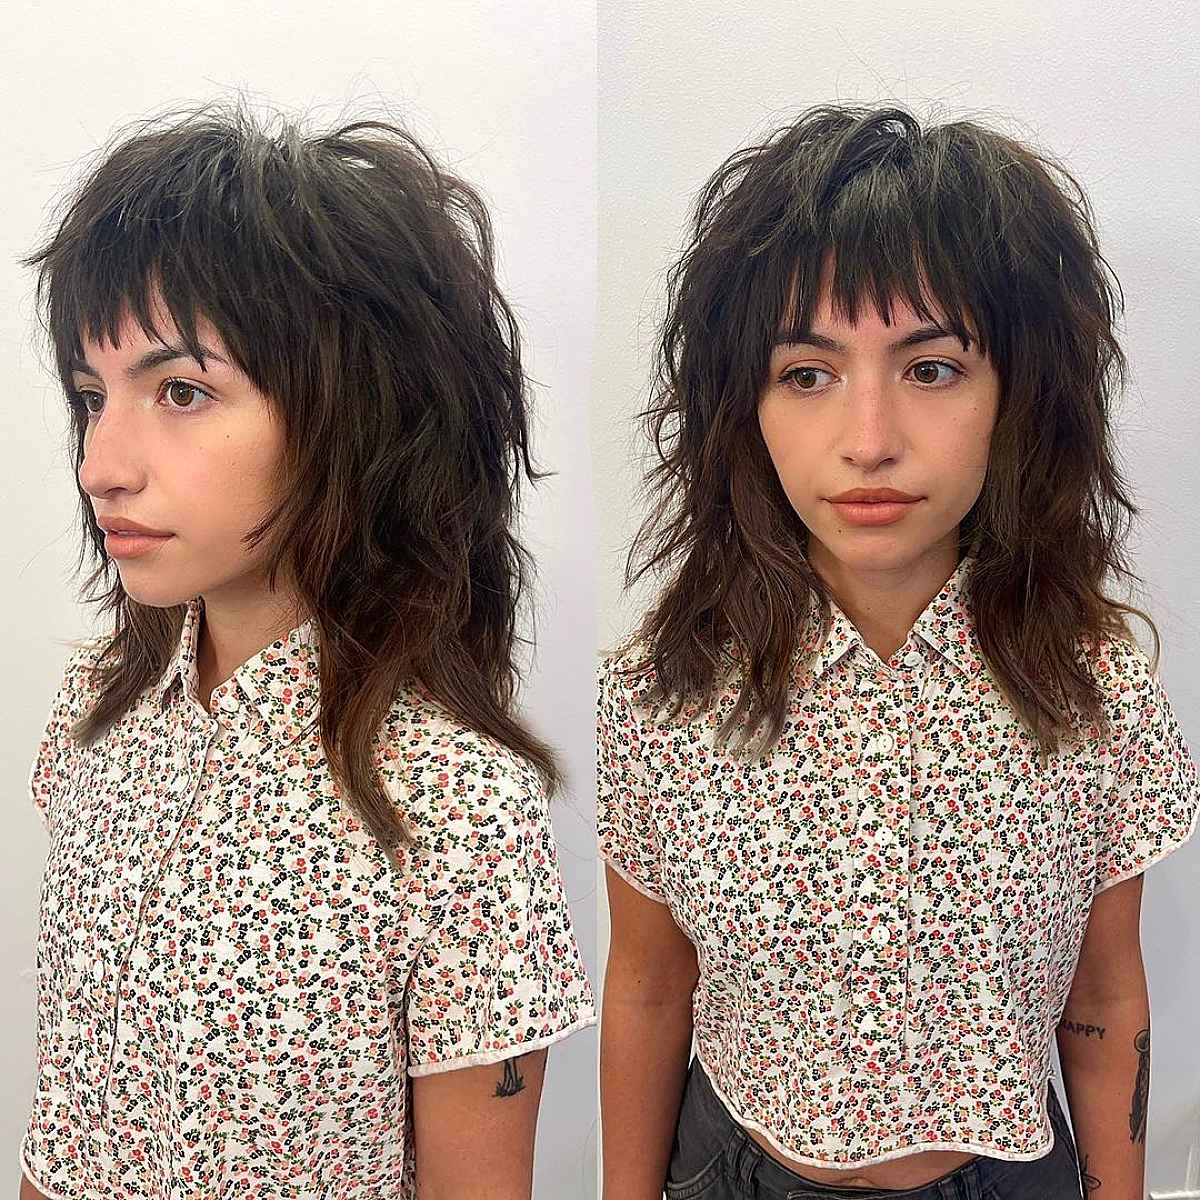 Mid-Length Shaggy Wolf Cut with Textured Bangs